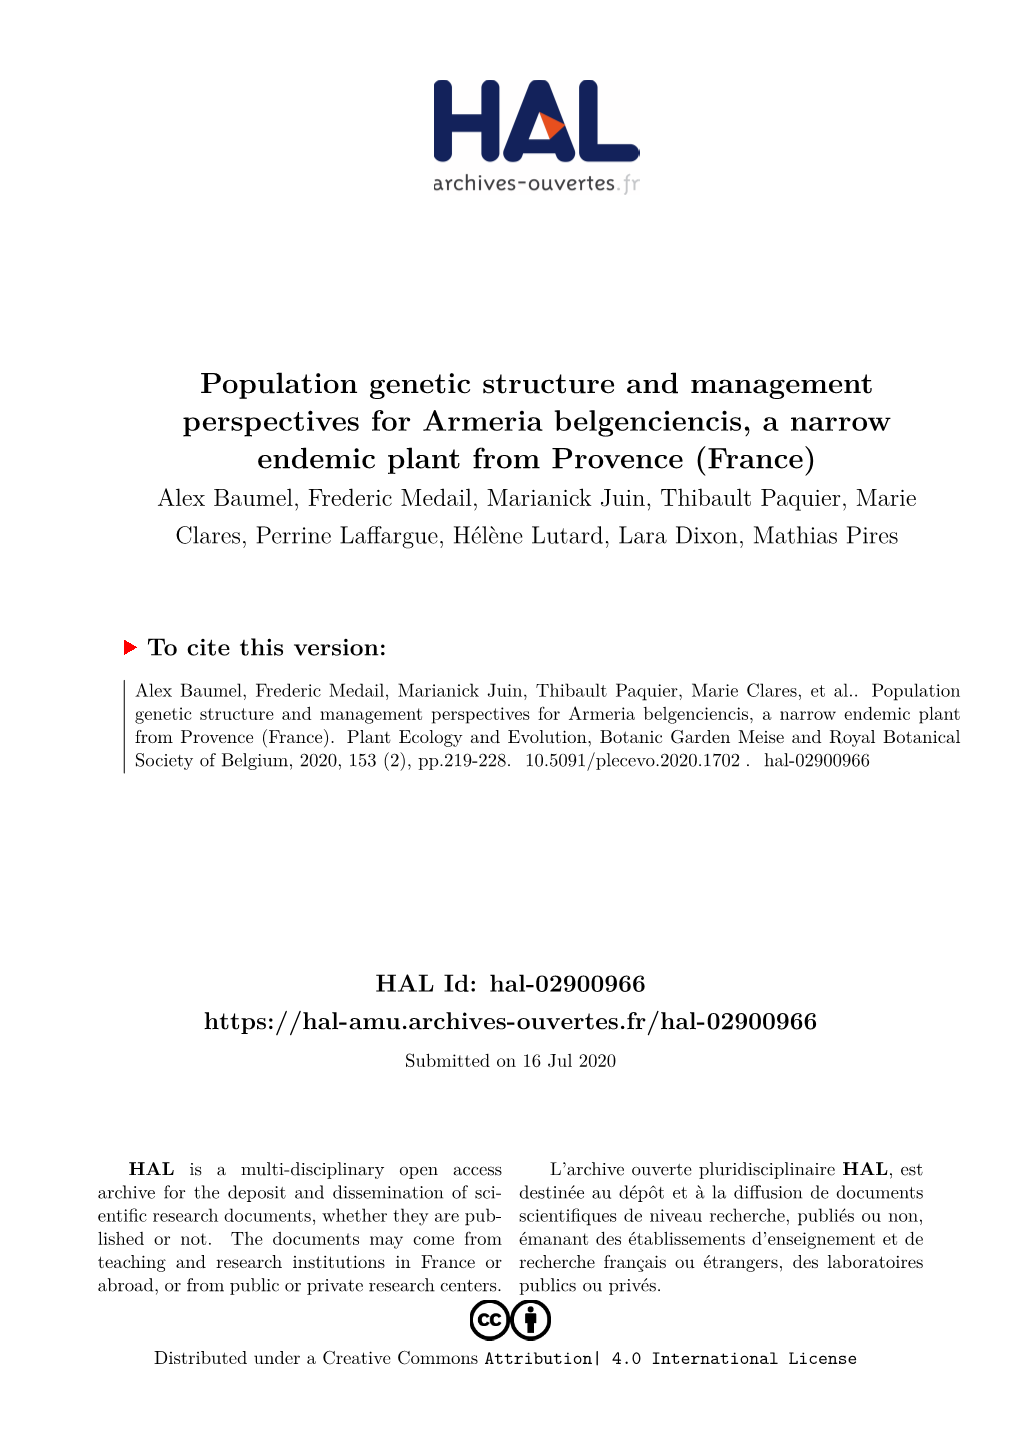 Population Genetic Structure and Management